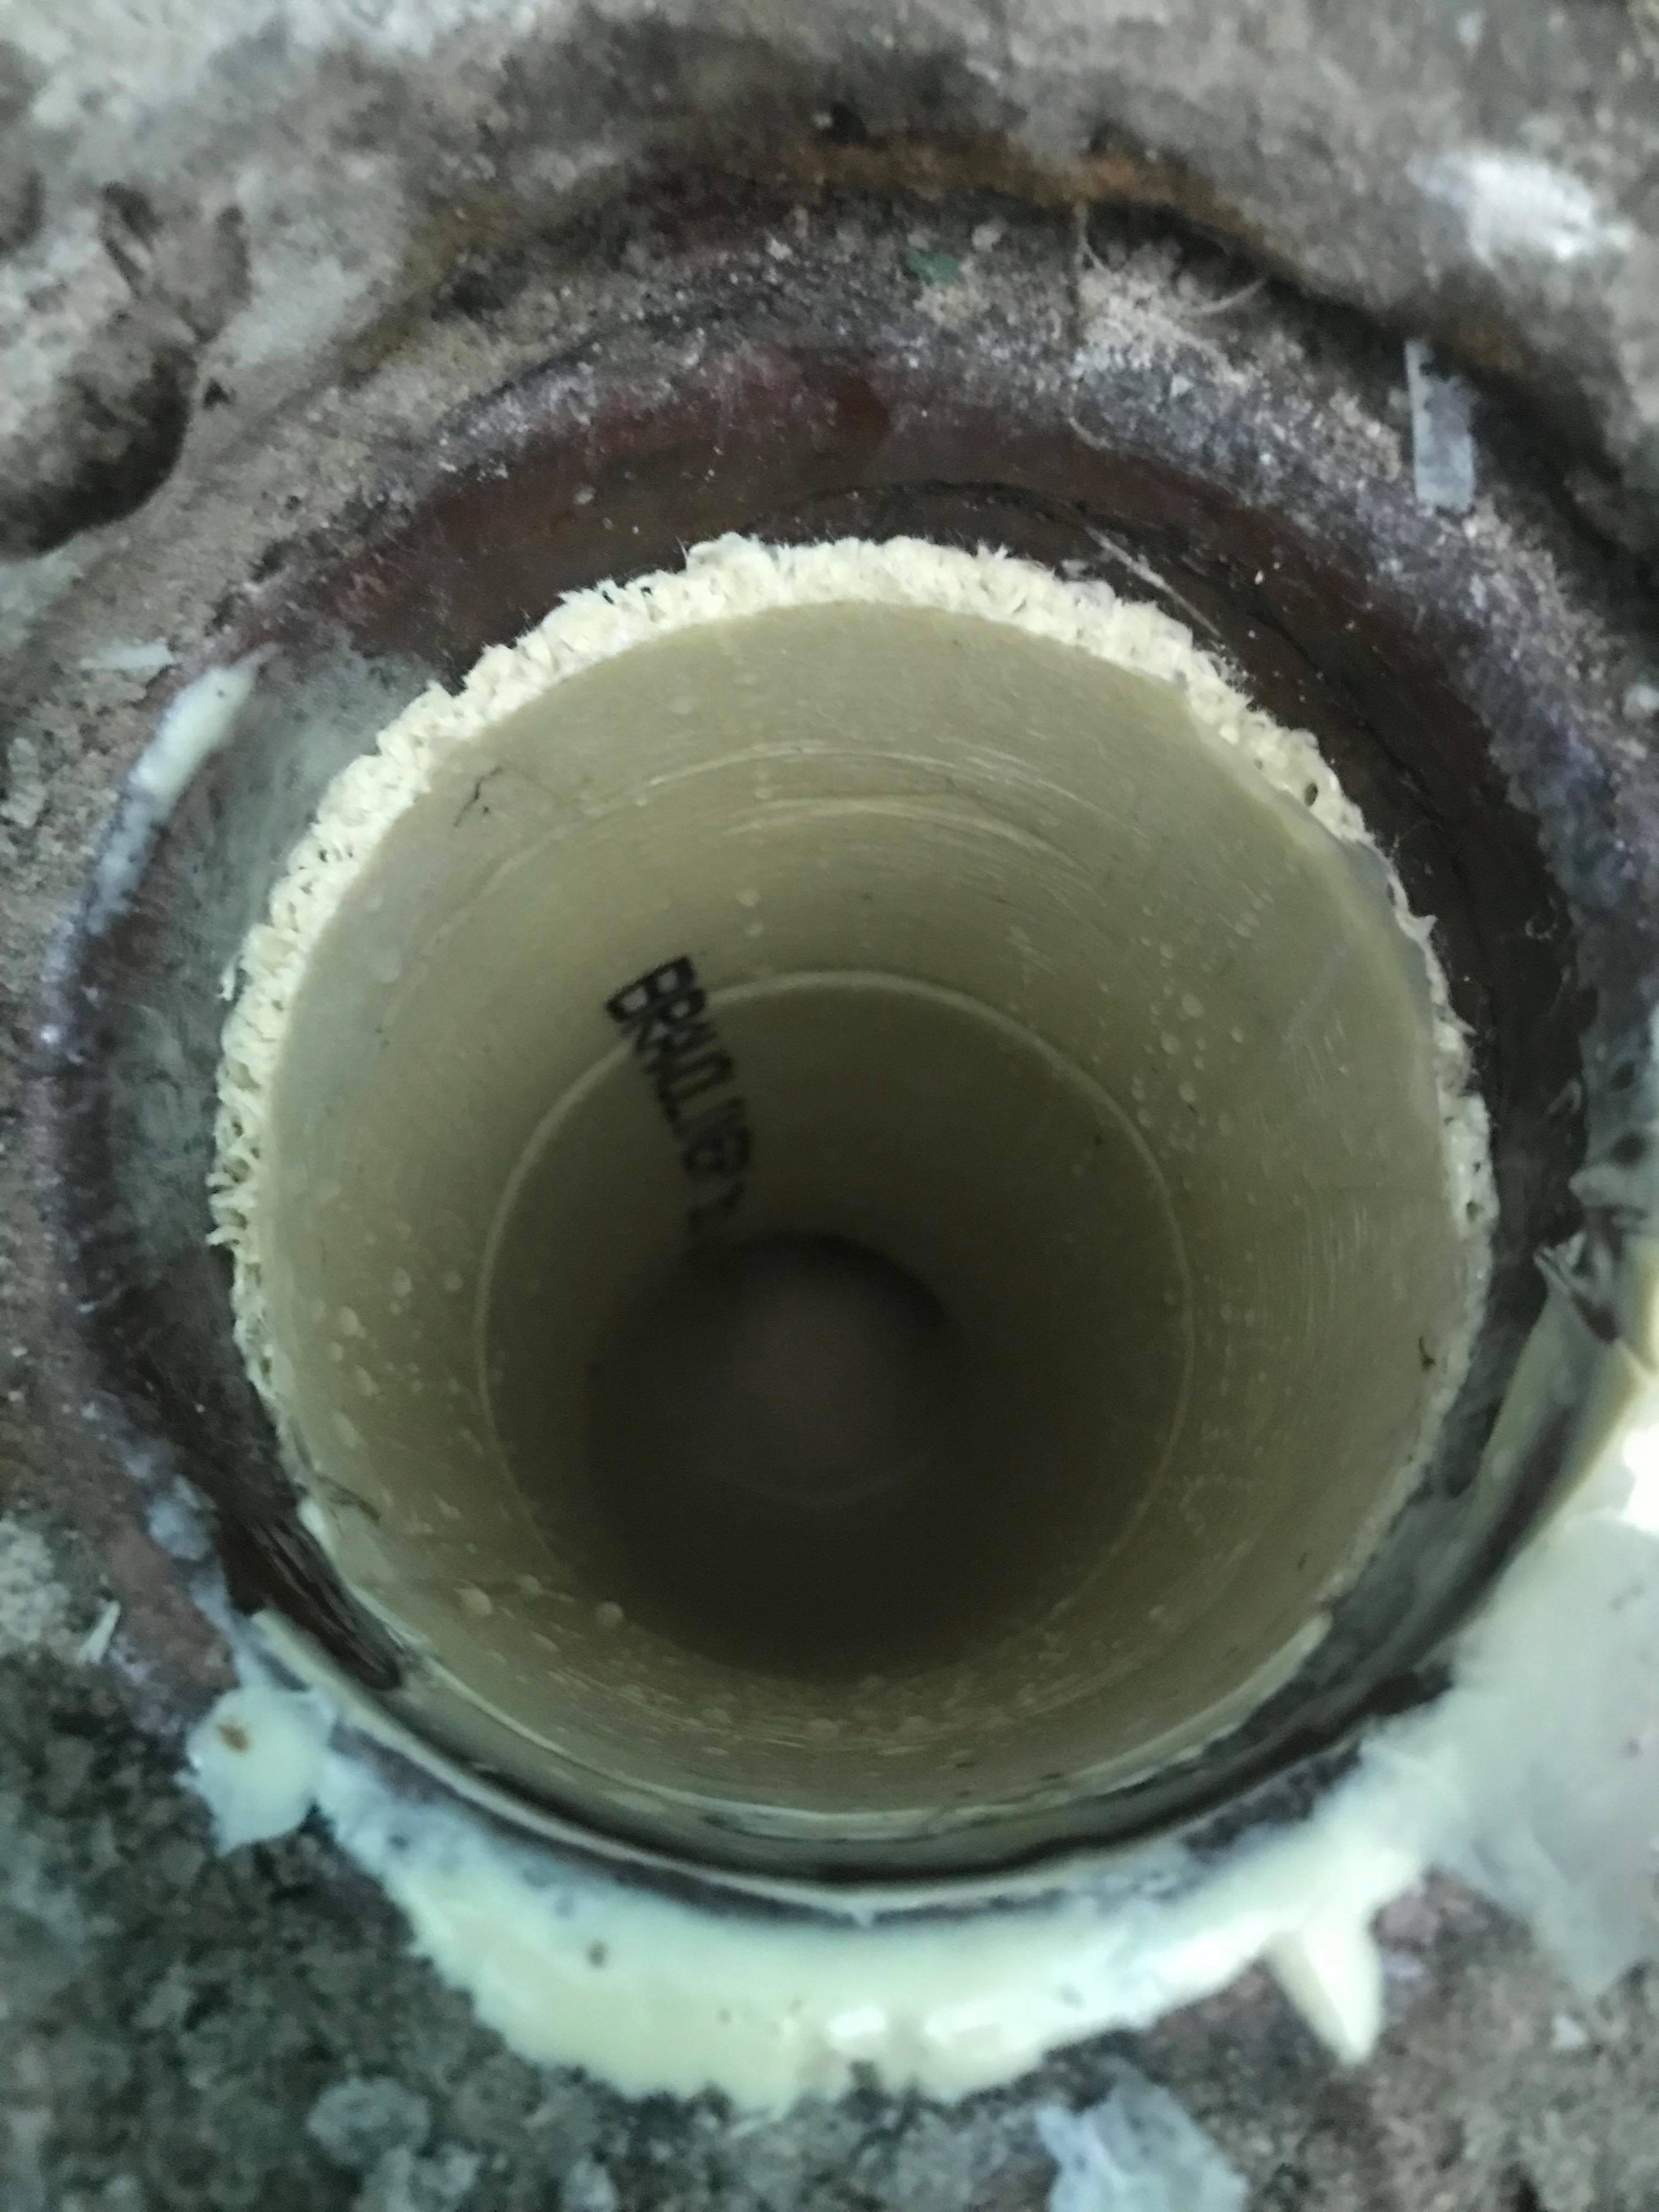 What Can I Pour Down My Drain To Keep It Clear?